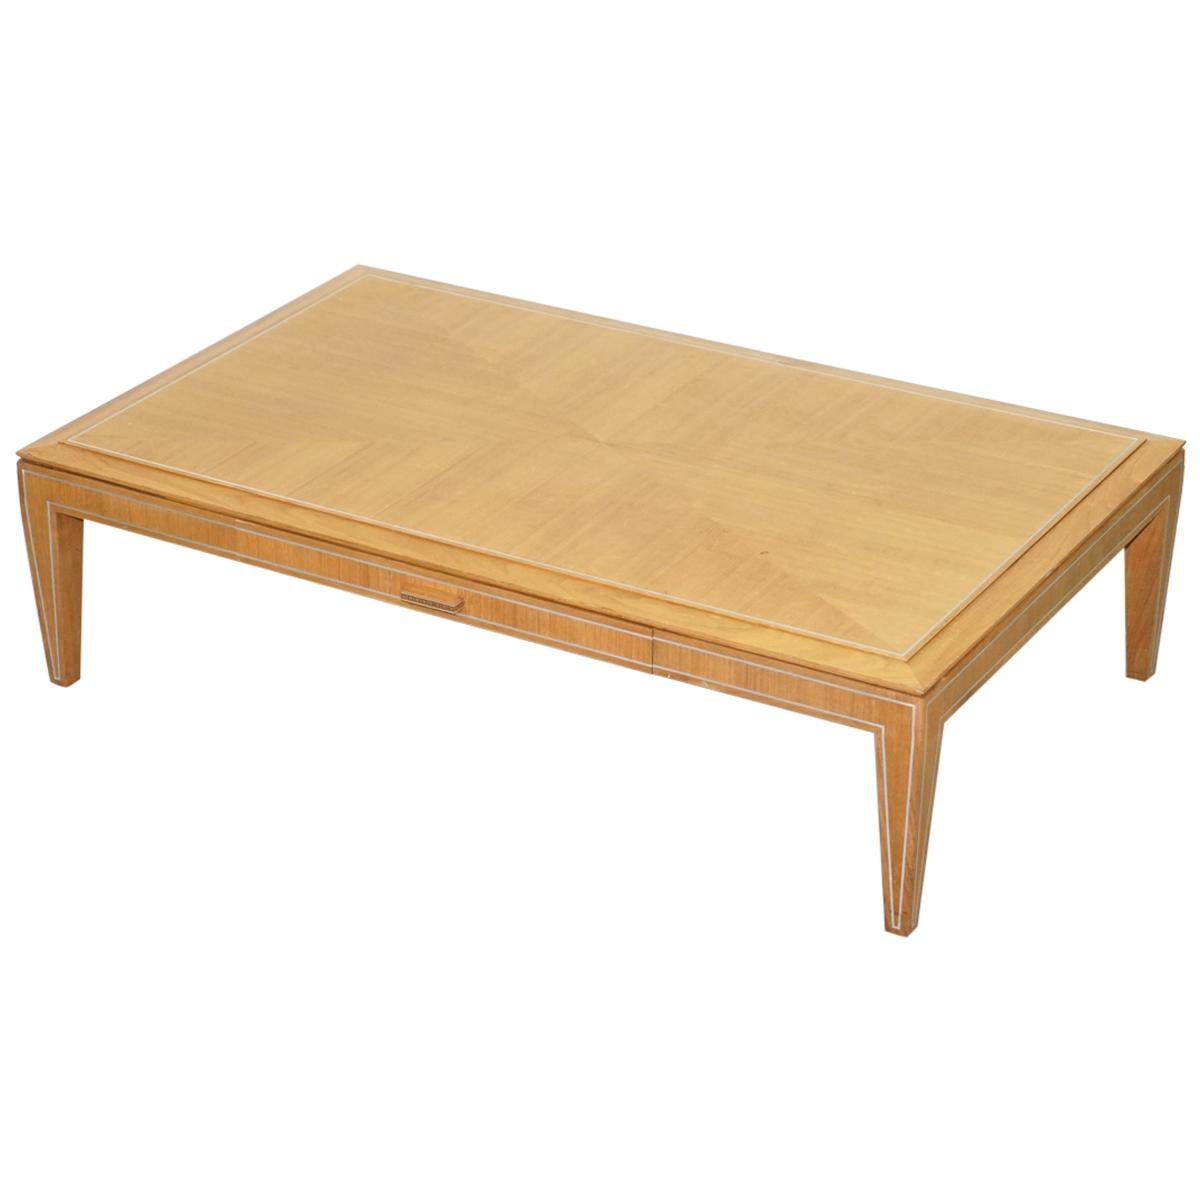 Viscount David Linley Sycamore Walnut with Chrome Inlay Coffee Table For Sale